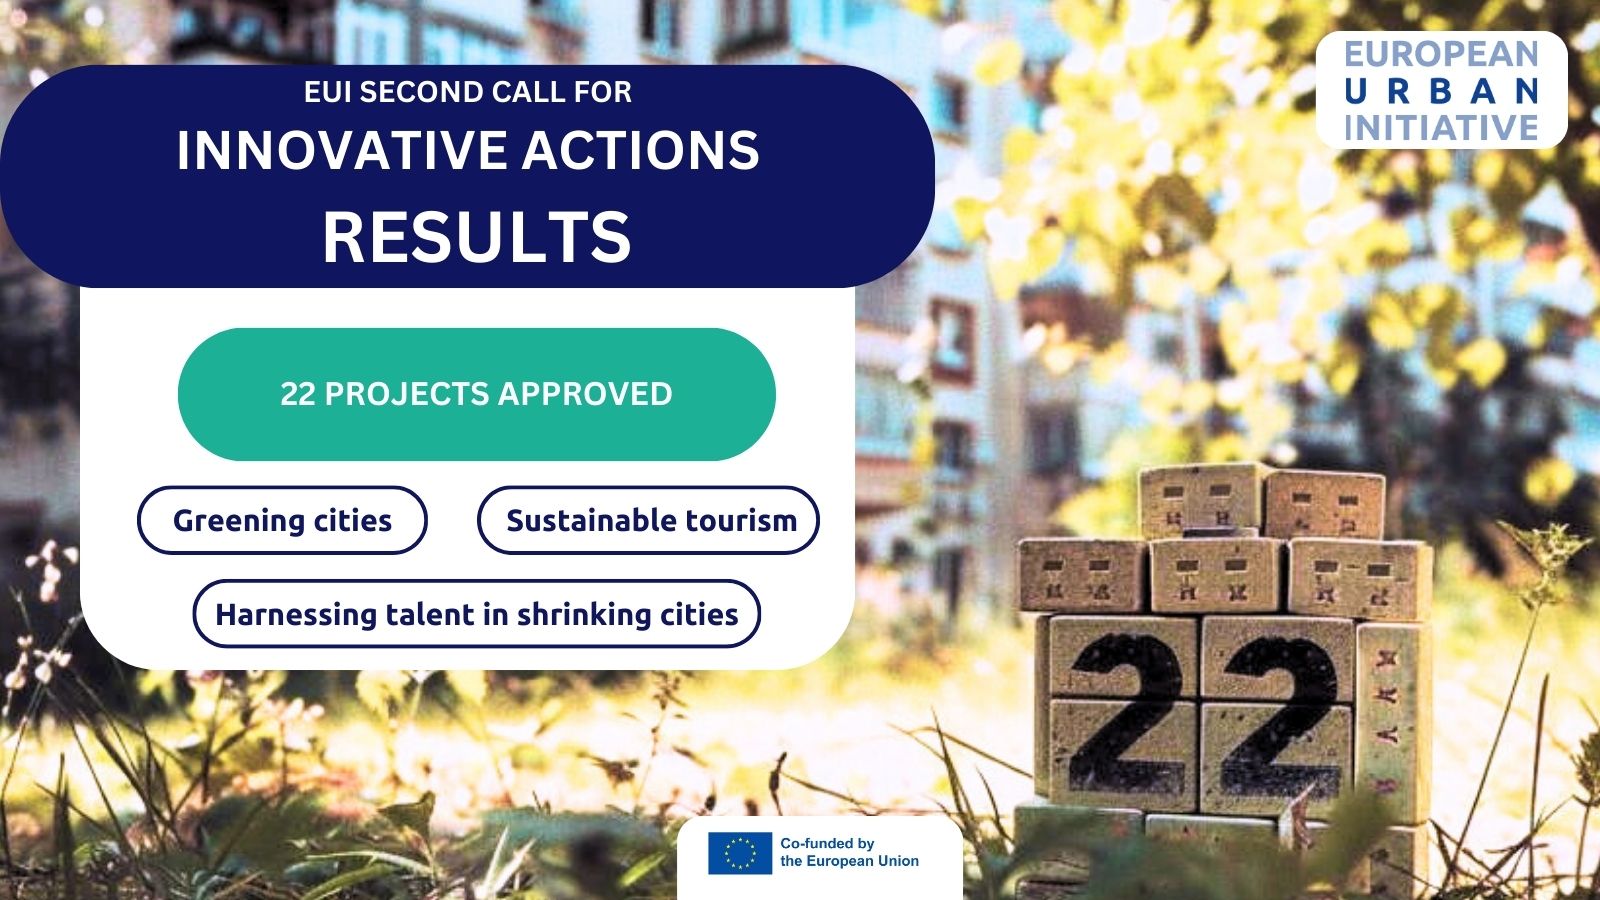 European Urban Initiative: 22 innovative projects from EU cities supported as a result of the second call